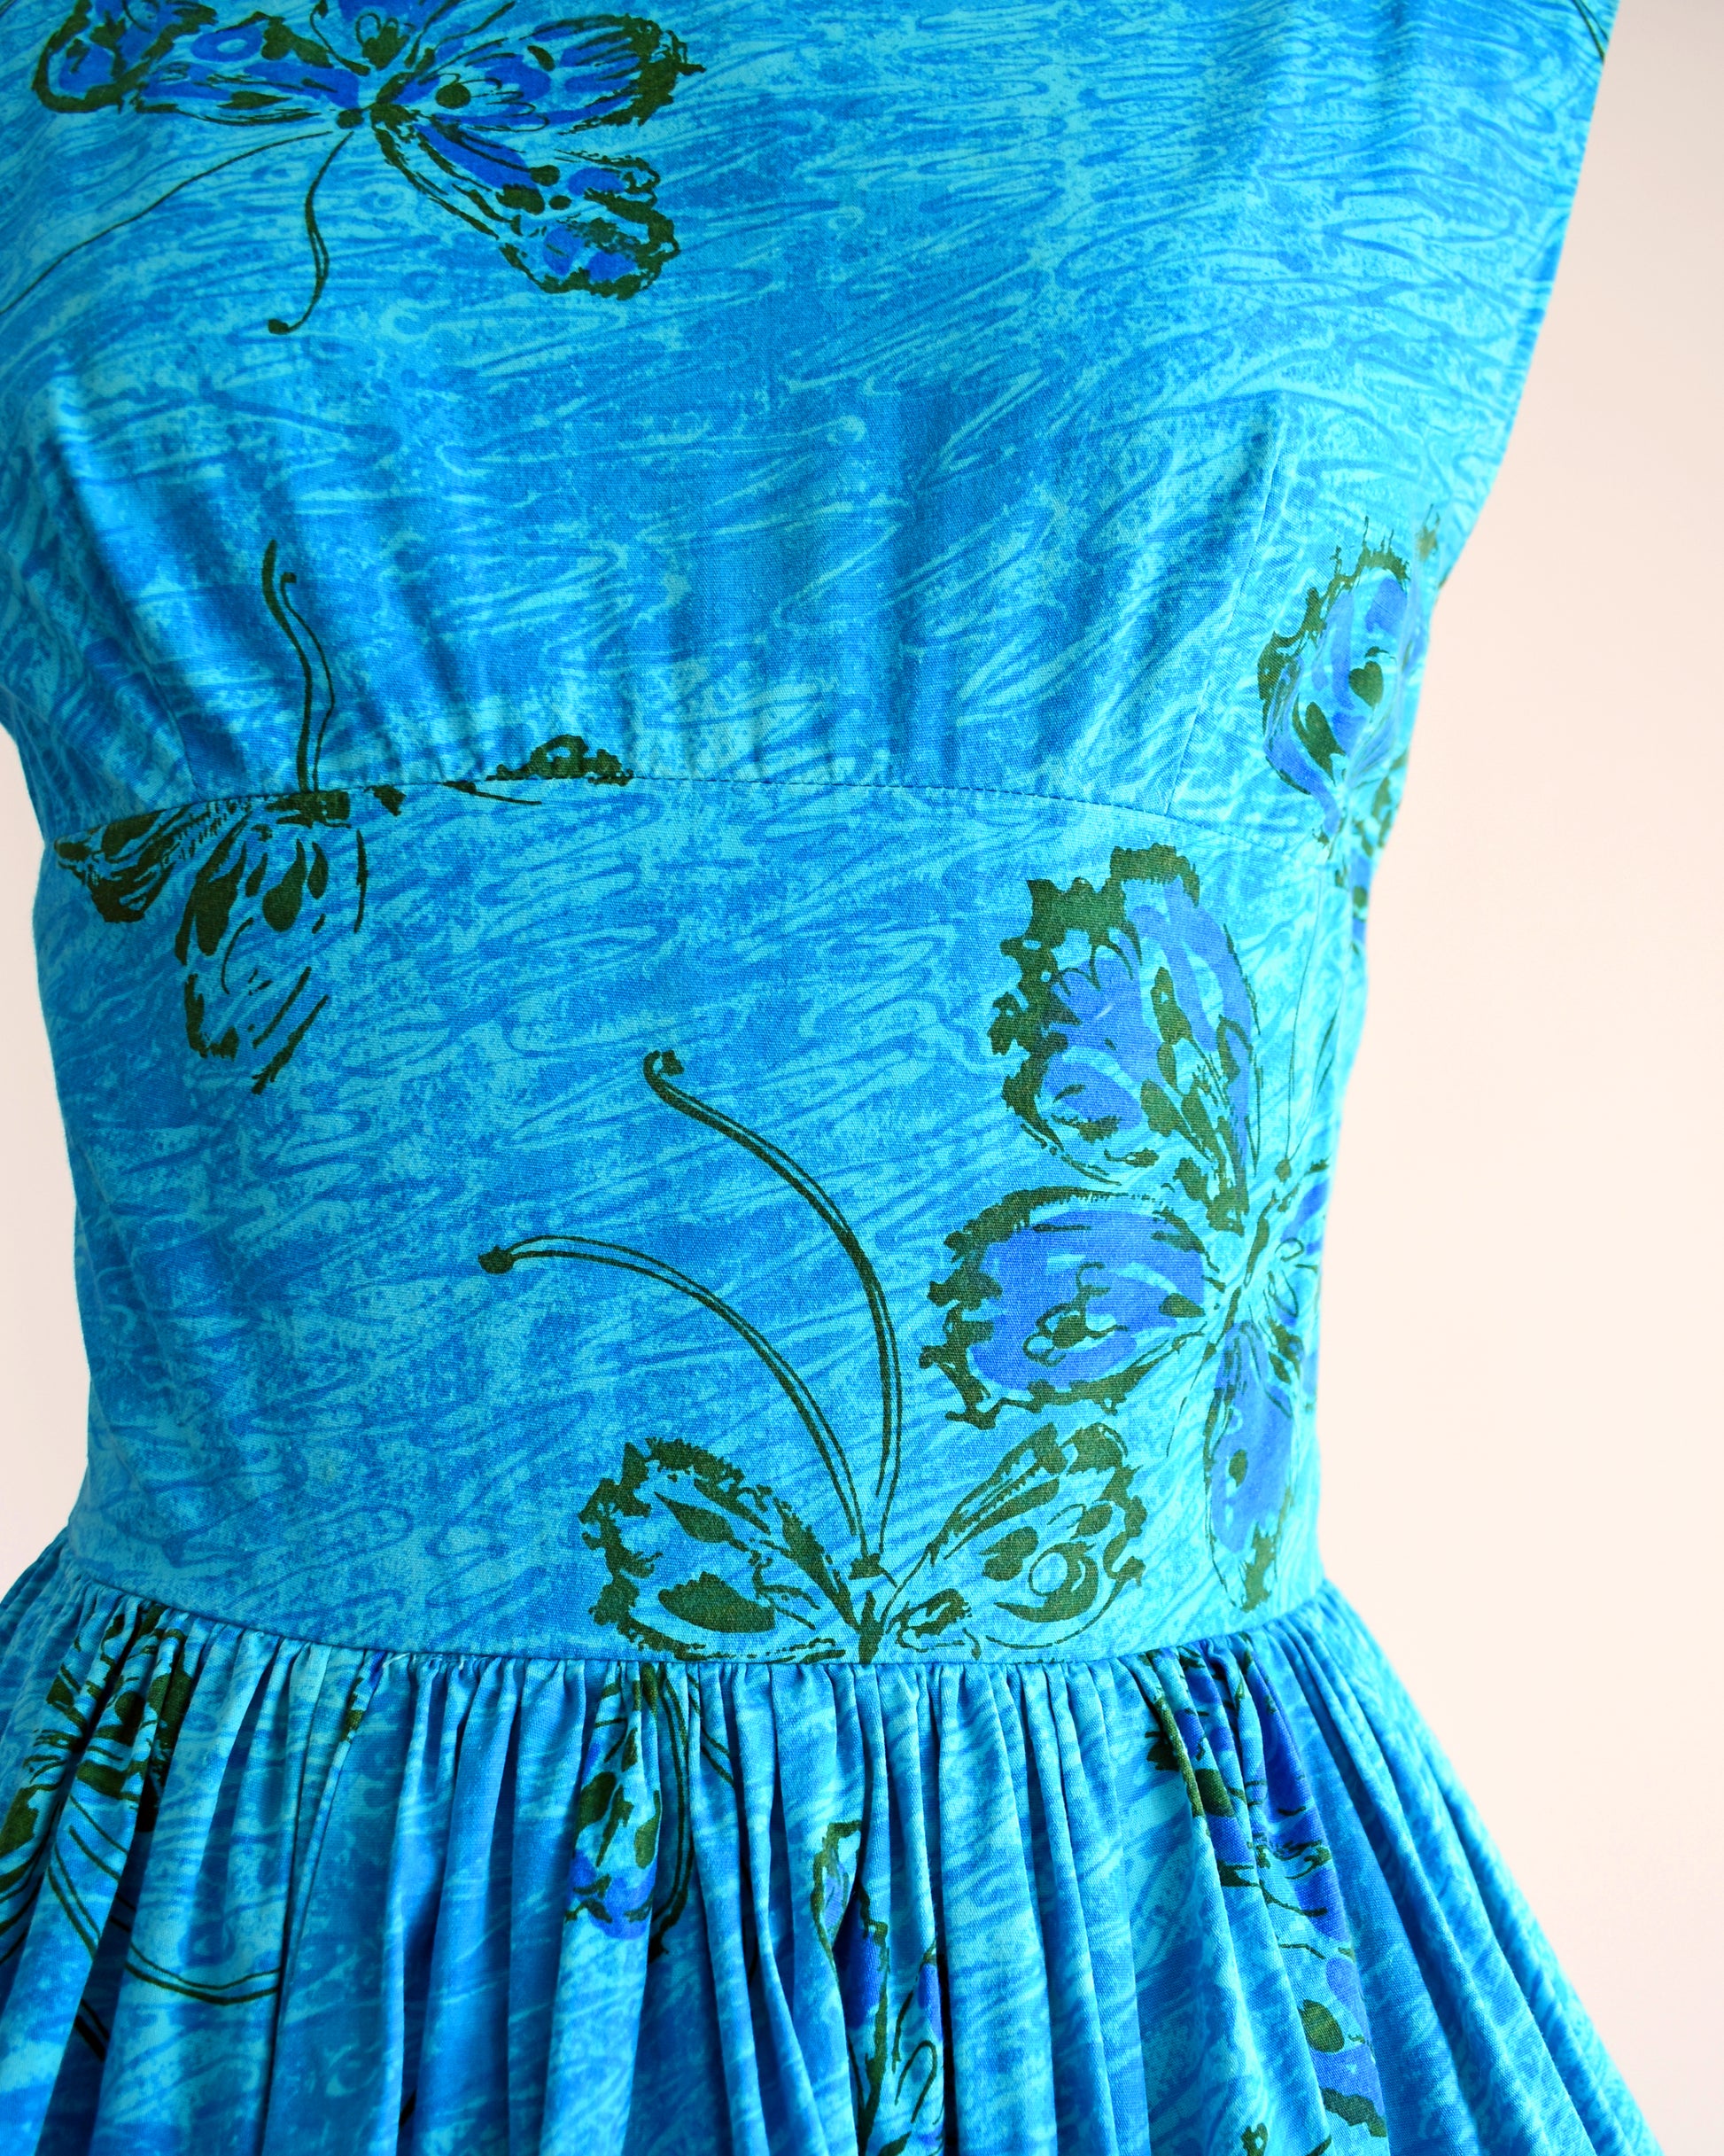 Close up of the bodice of the vintage 1950s dress which shows the swirl and butterfly pattern